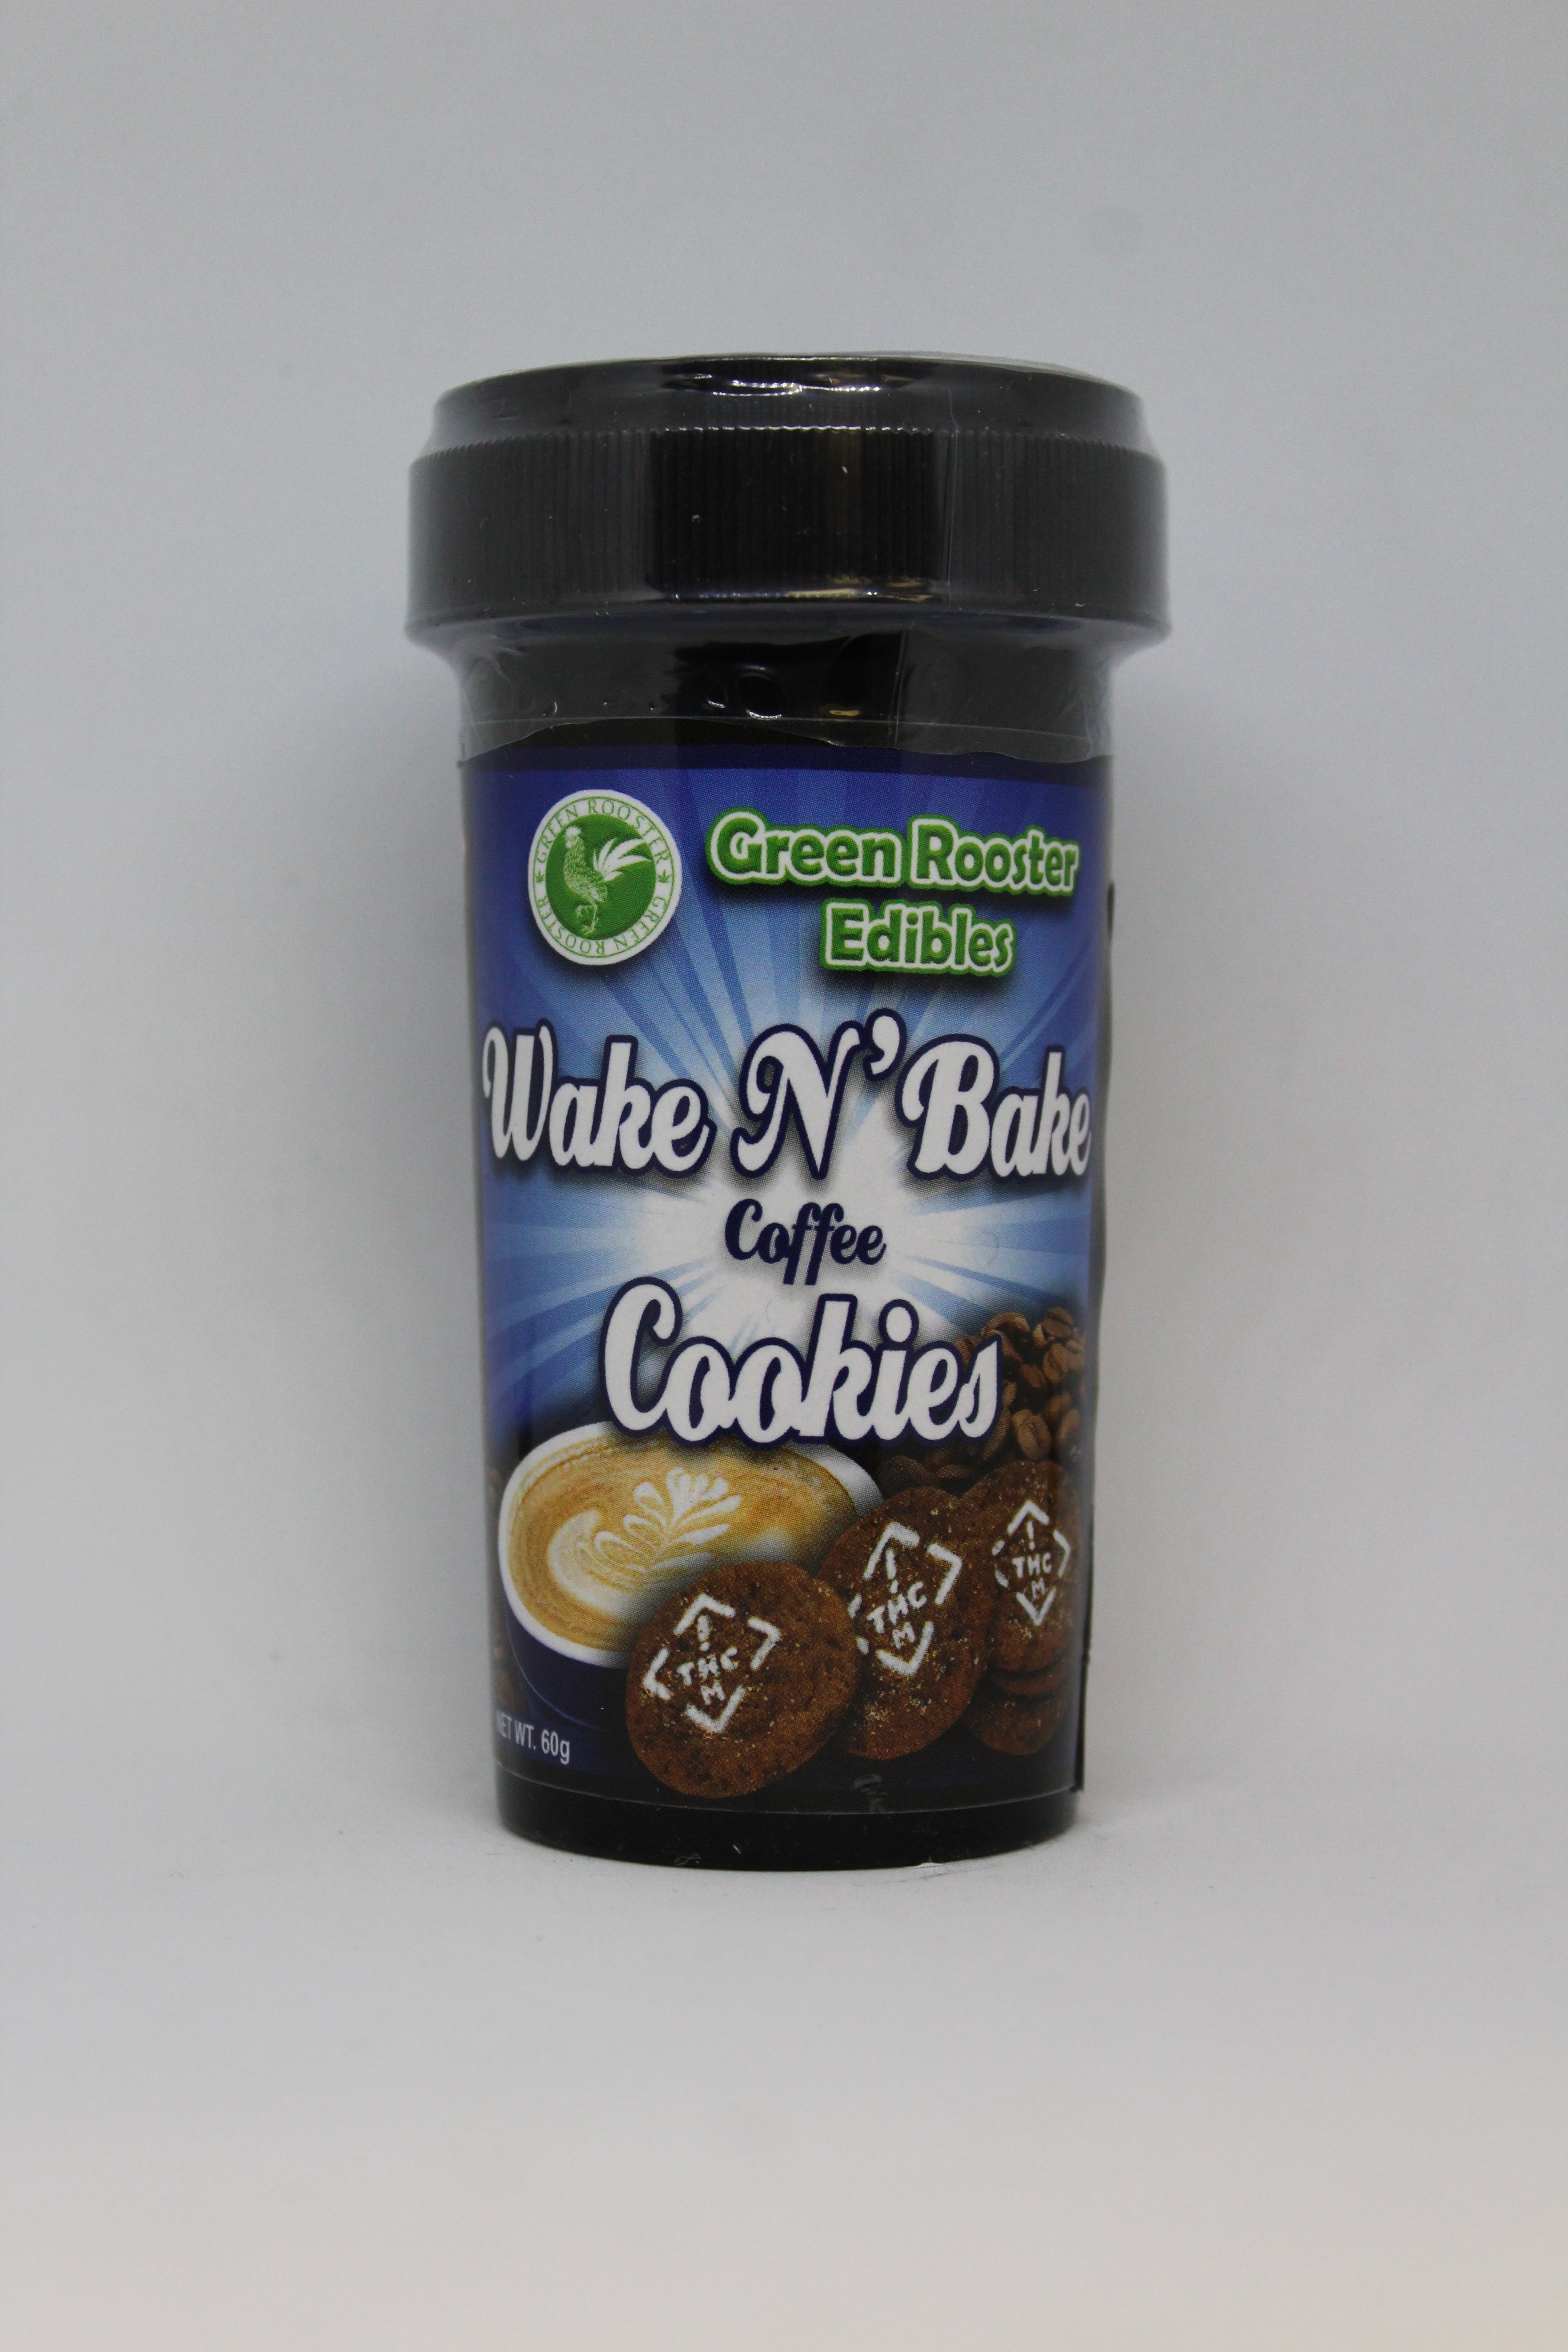 edible-green-rooster-wake-n-bake-250-mg-cookies-tax-not-included